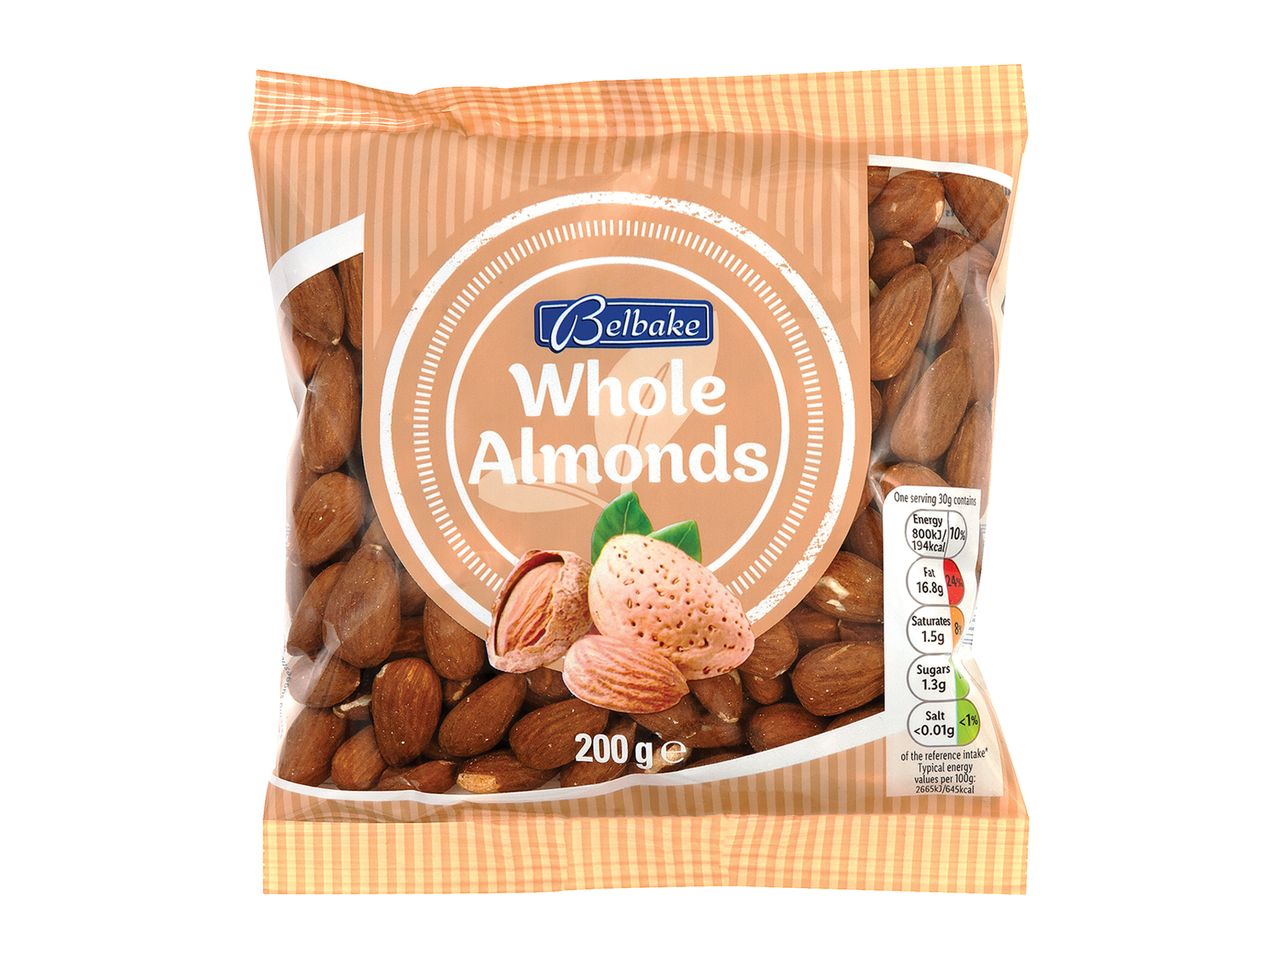 Go to full screen view: Belbake Whole Almonds - Image 1